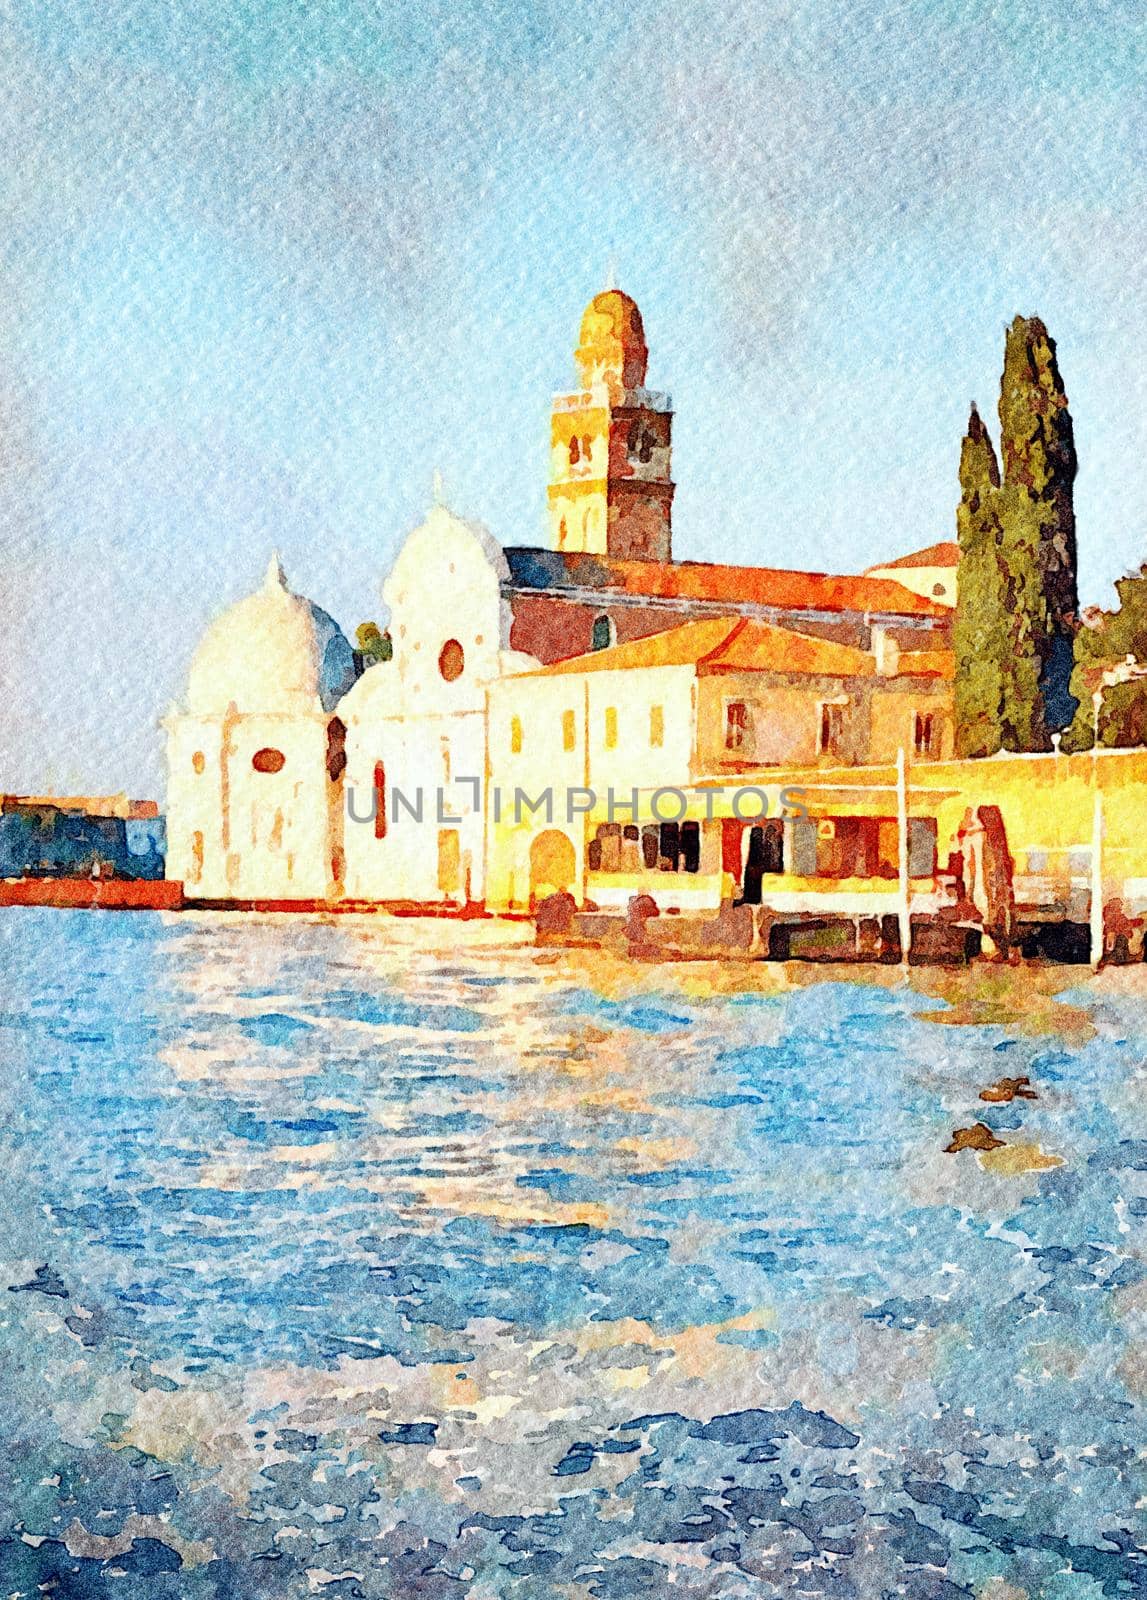 Watercolor which represents a glimpse of one of the cathedrals of Venice seen from the lagoon